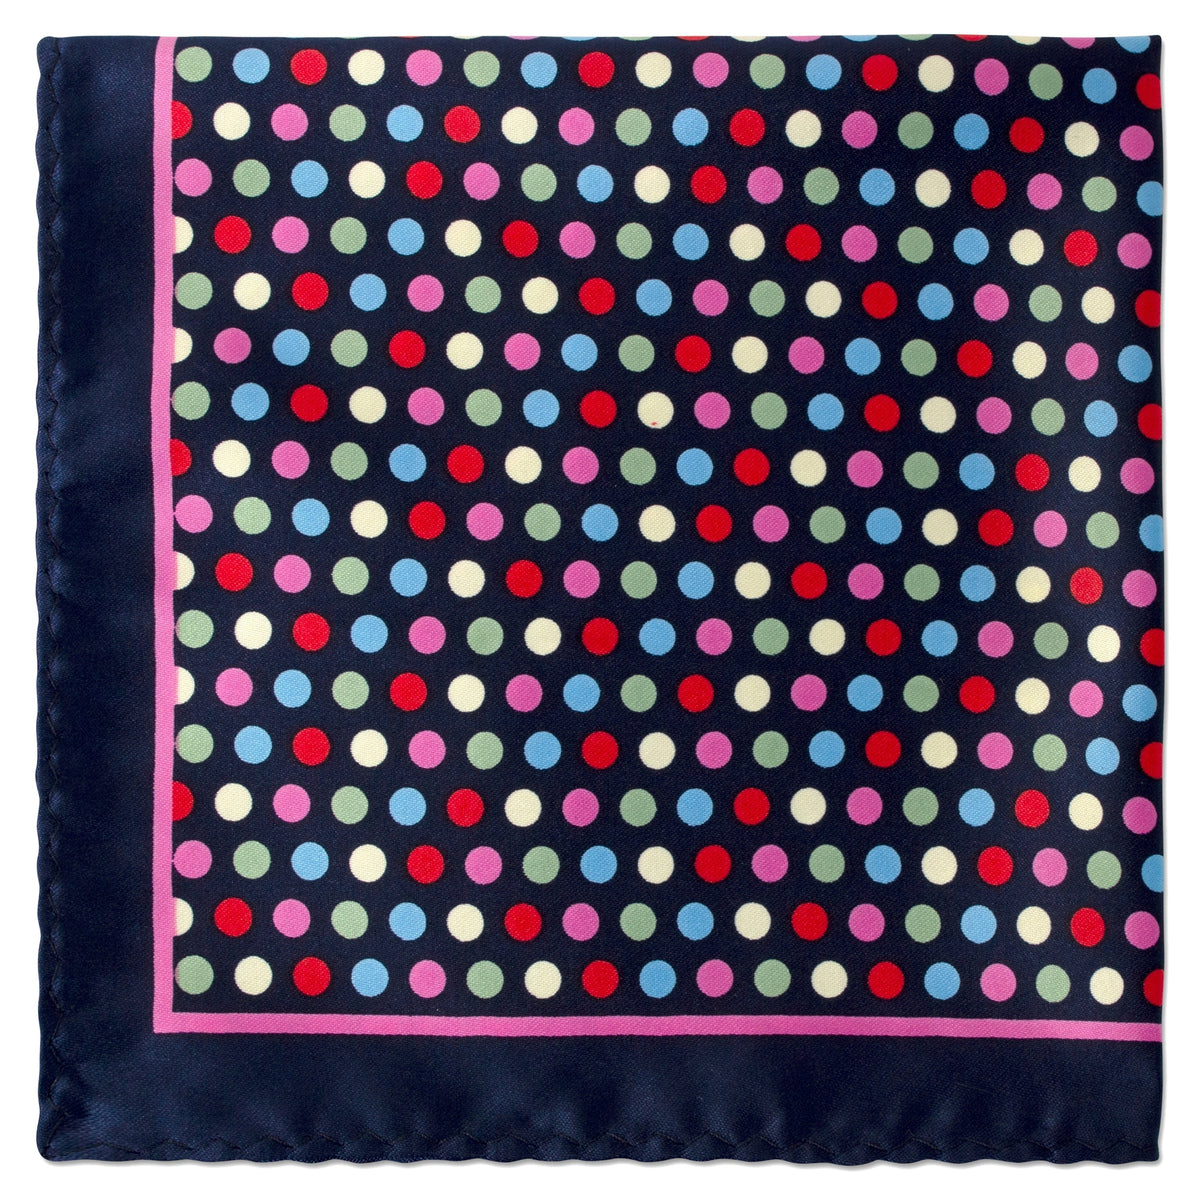 Colourful Bubble Dots Pocket Square in Navy Blue-Pocket Squares-MarZthomson-Cufflinks.com.sg